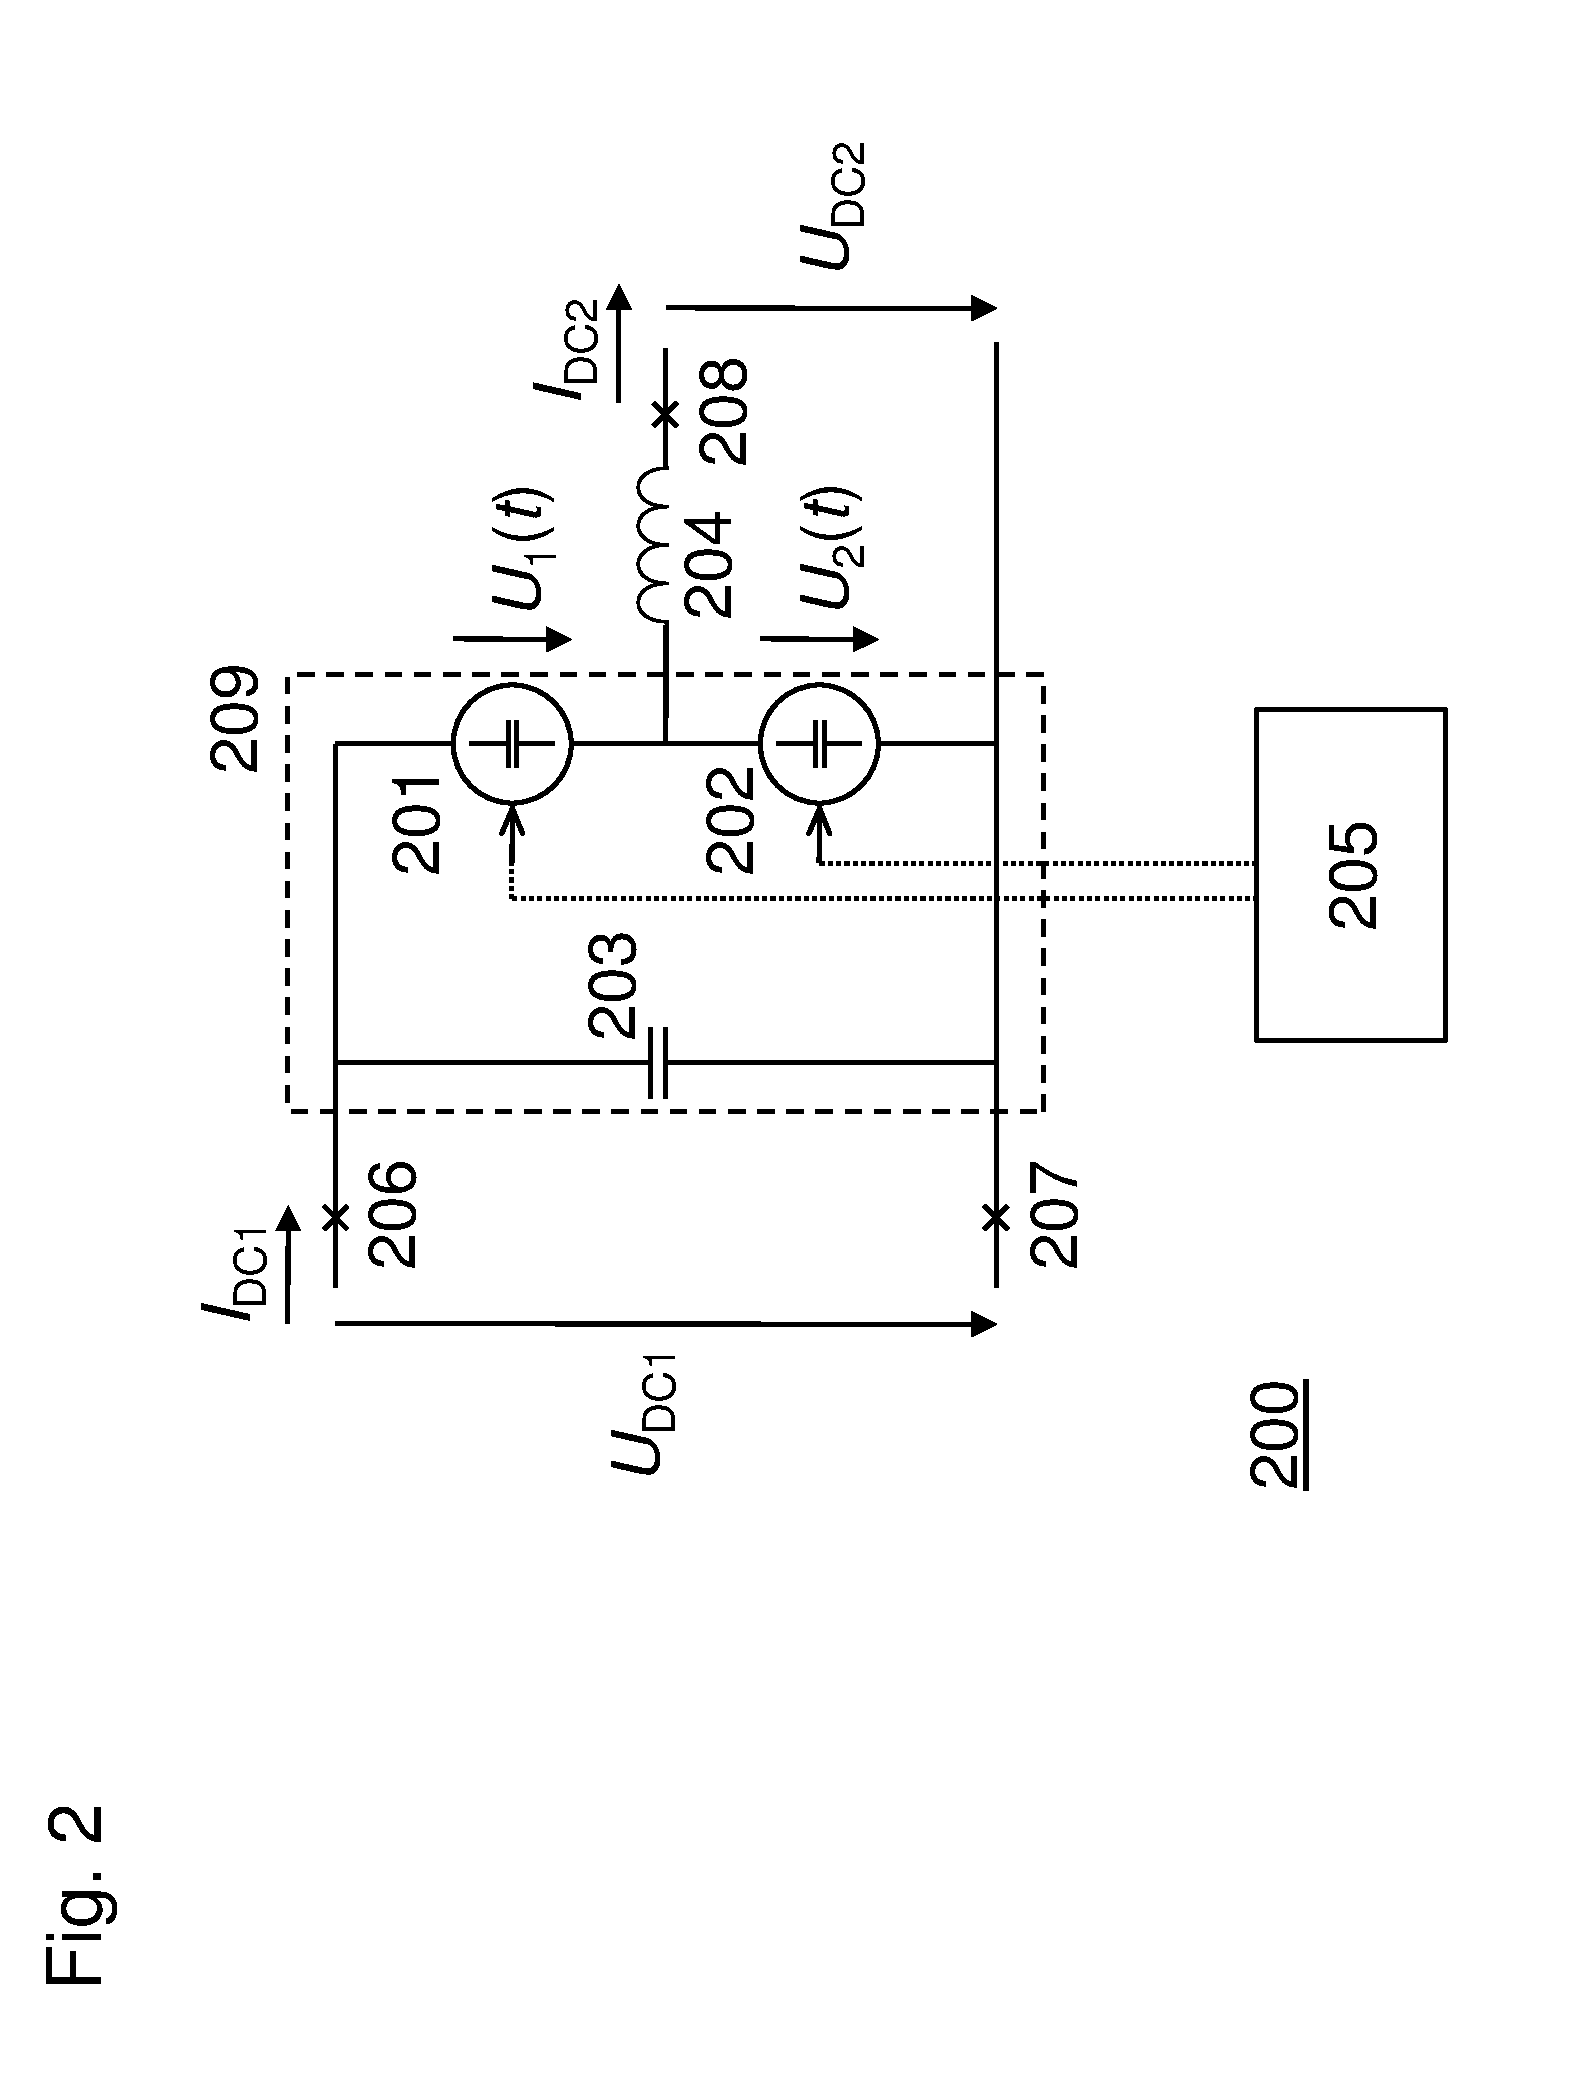 Bidirectional unisolated dc-dc converter based on cascaded cells